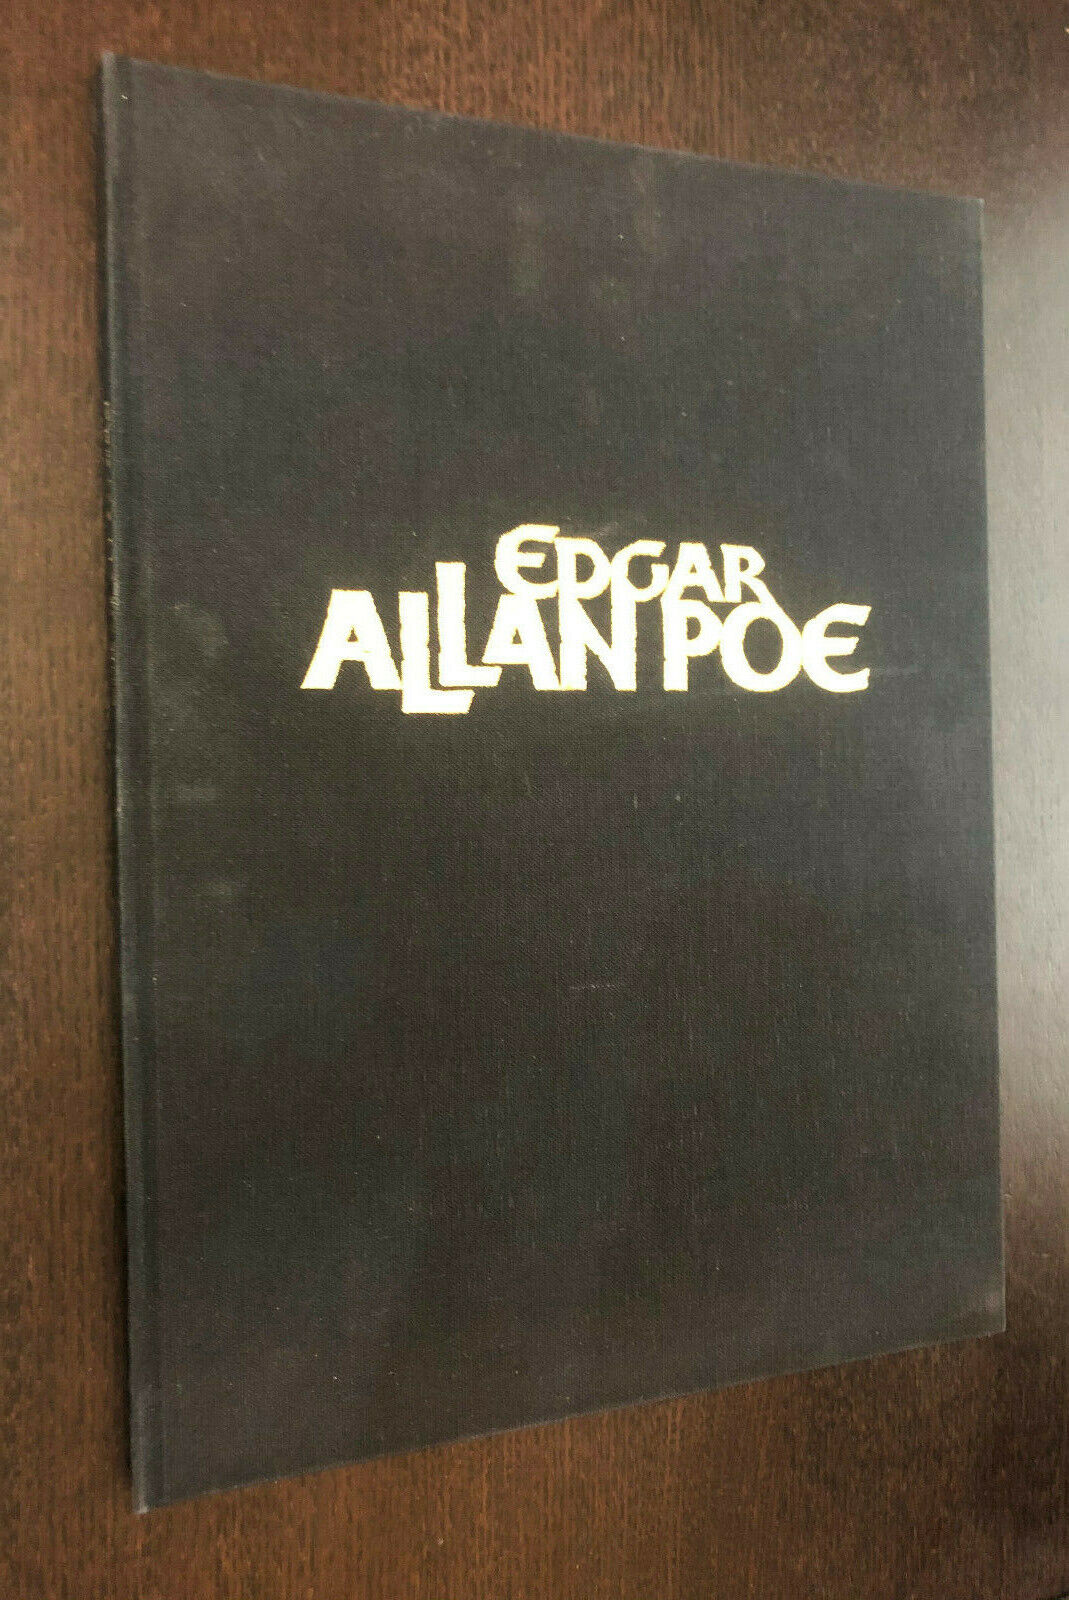 POE FALL OF THE HOUSE OF USHER -- Richard Corben -- 1985 Catalan SIGNED / #d HC